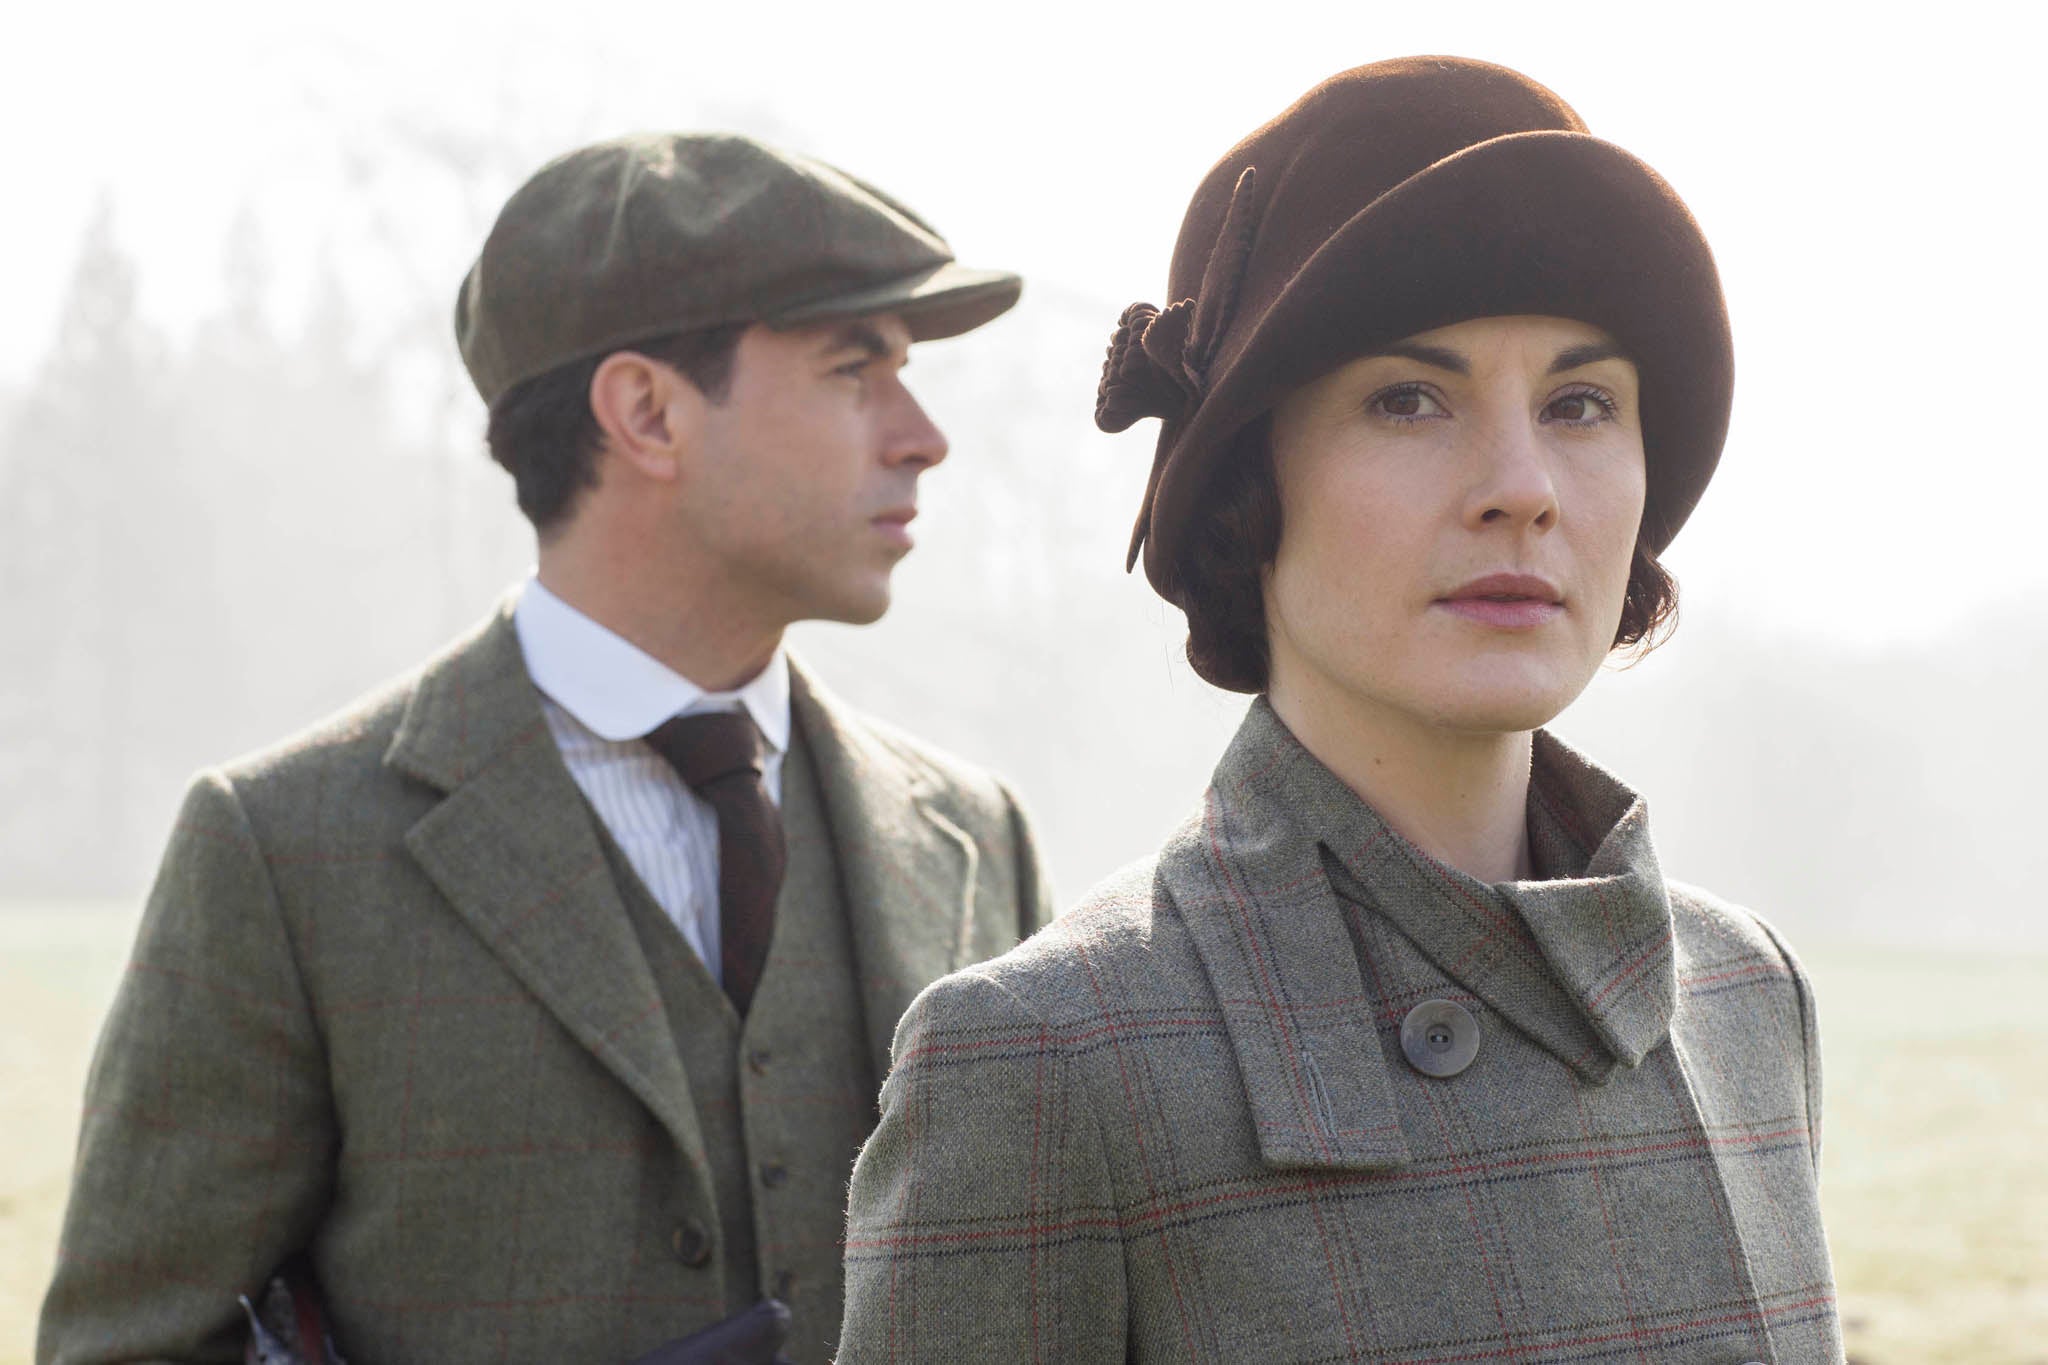 Lady Mary goes hunting with suitor Lord Gillingham